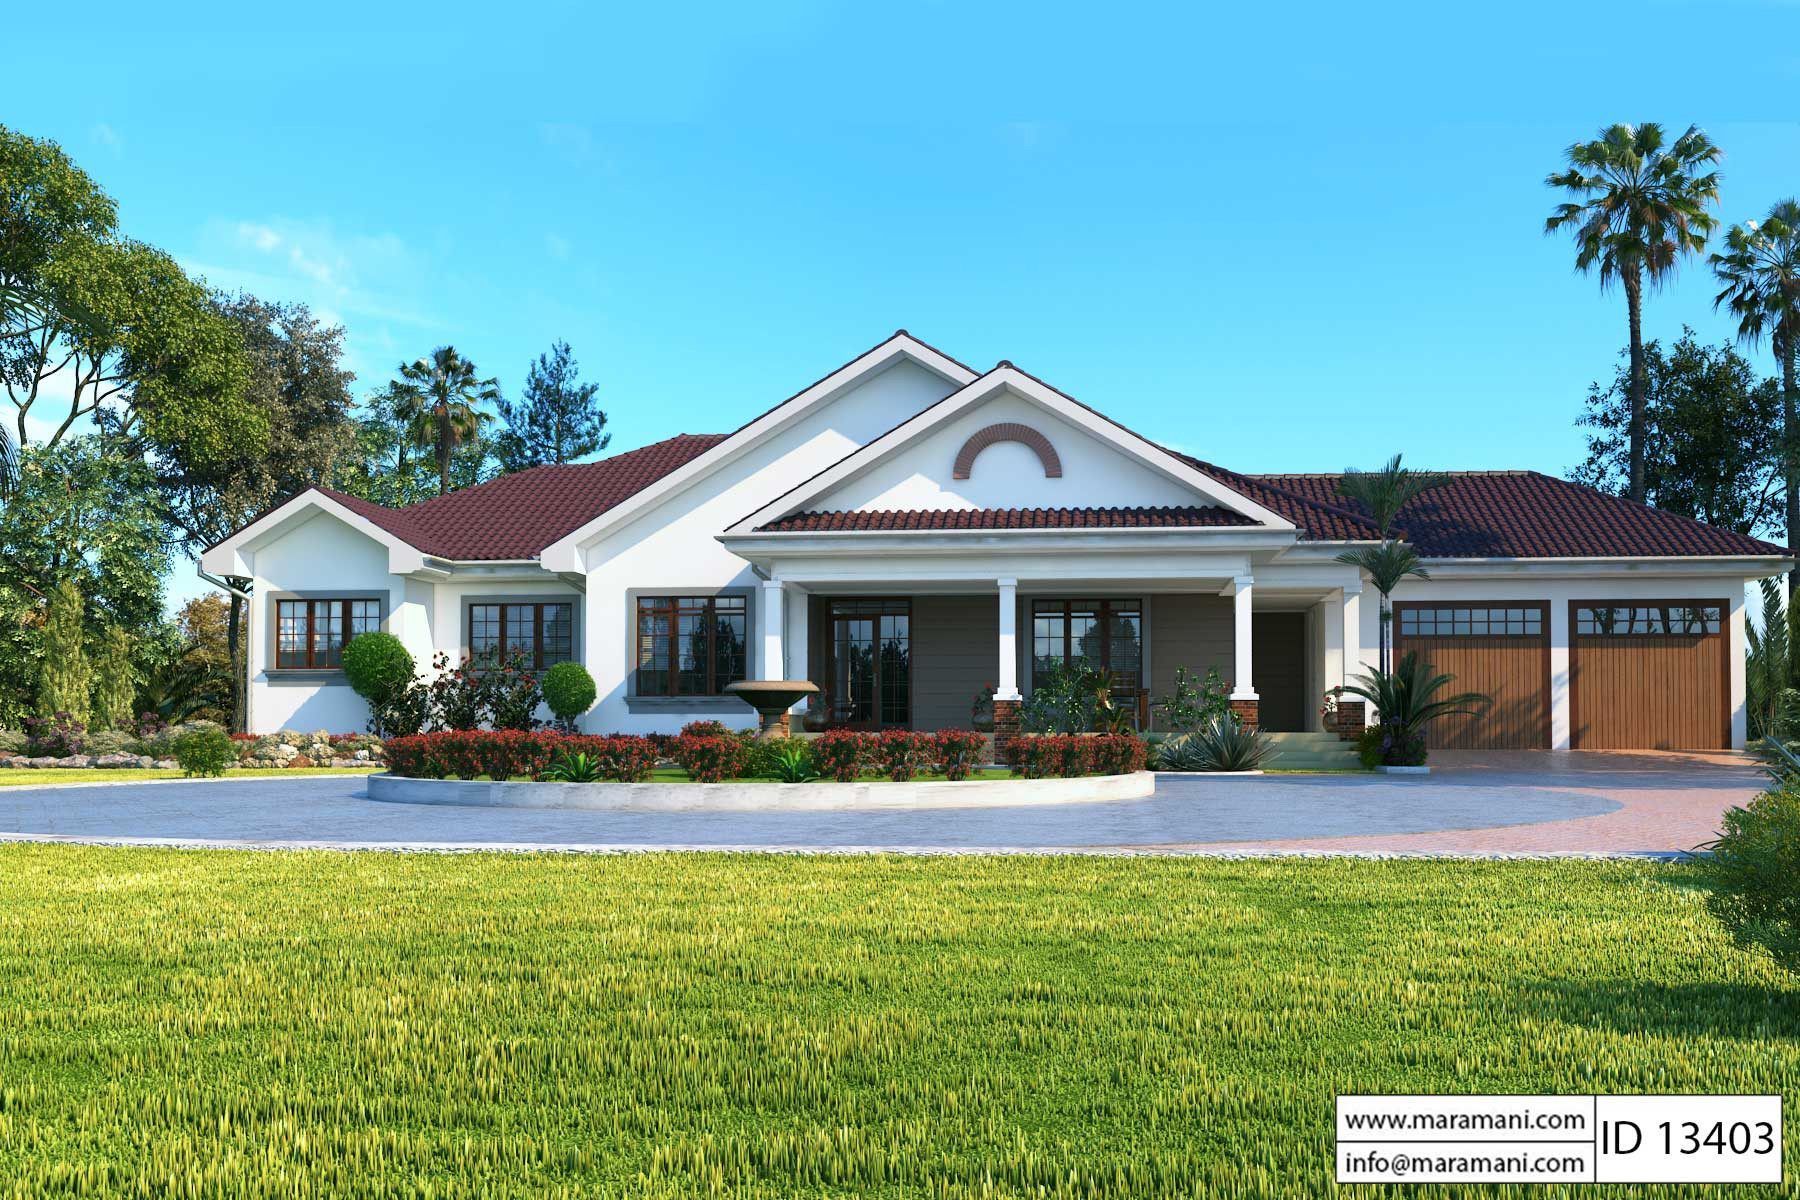 3 Bedroom bungalow with garage - ID 13403 - House Plans by Maramani